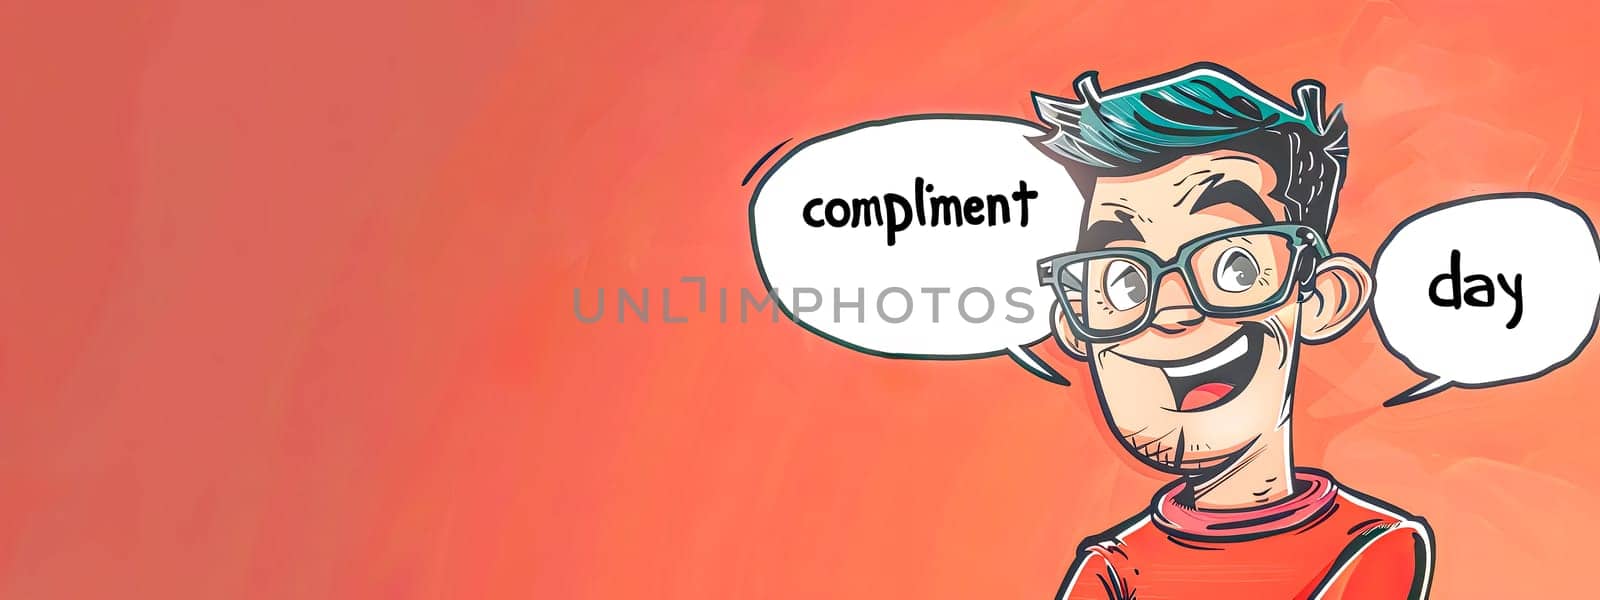 Cheerful cartoon man celebrating compliment day by Edophoto